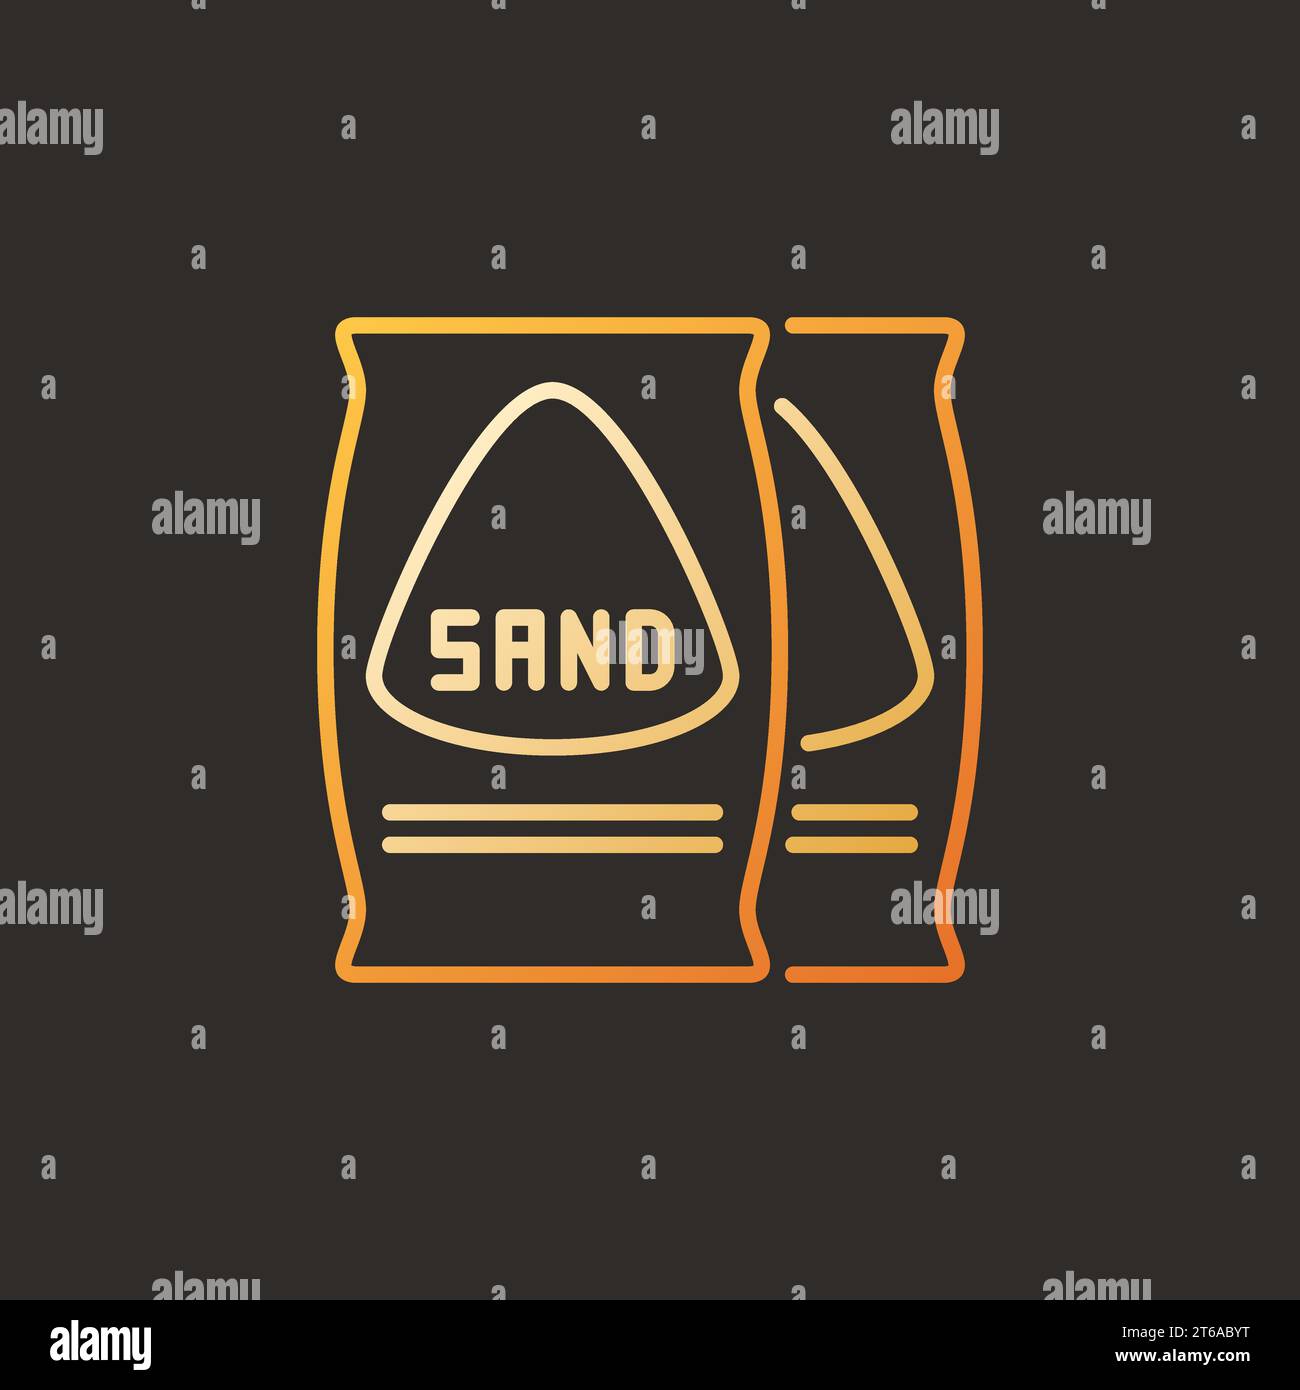 Bags with Sand vector colored outline icon or symbol on dark background ...